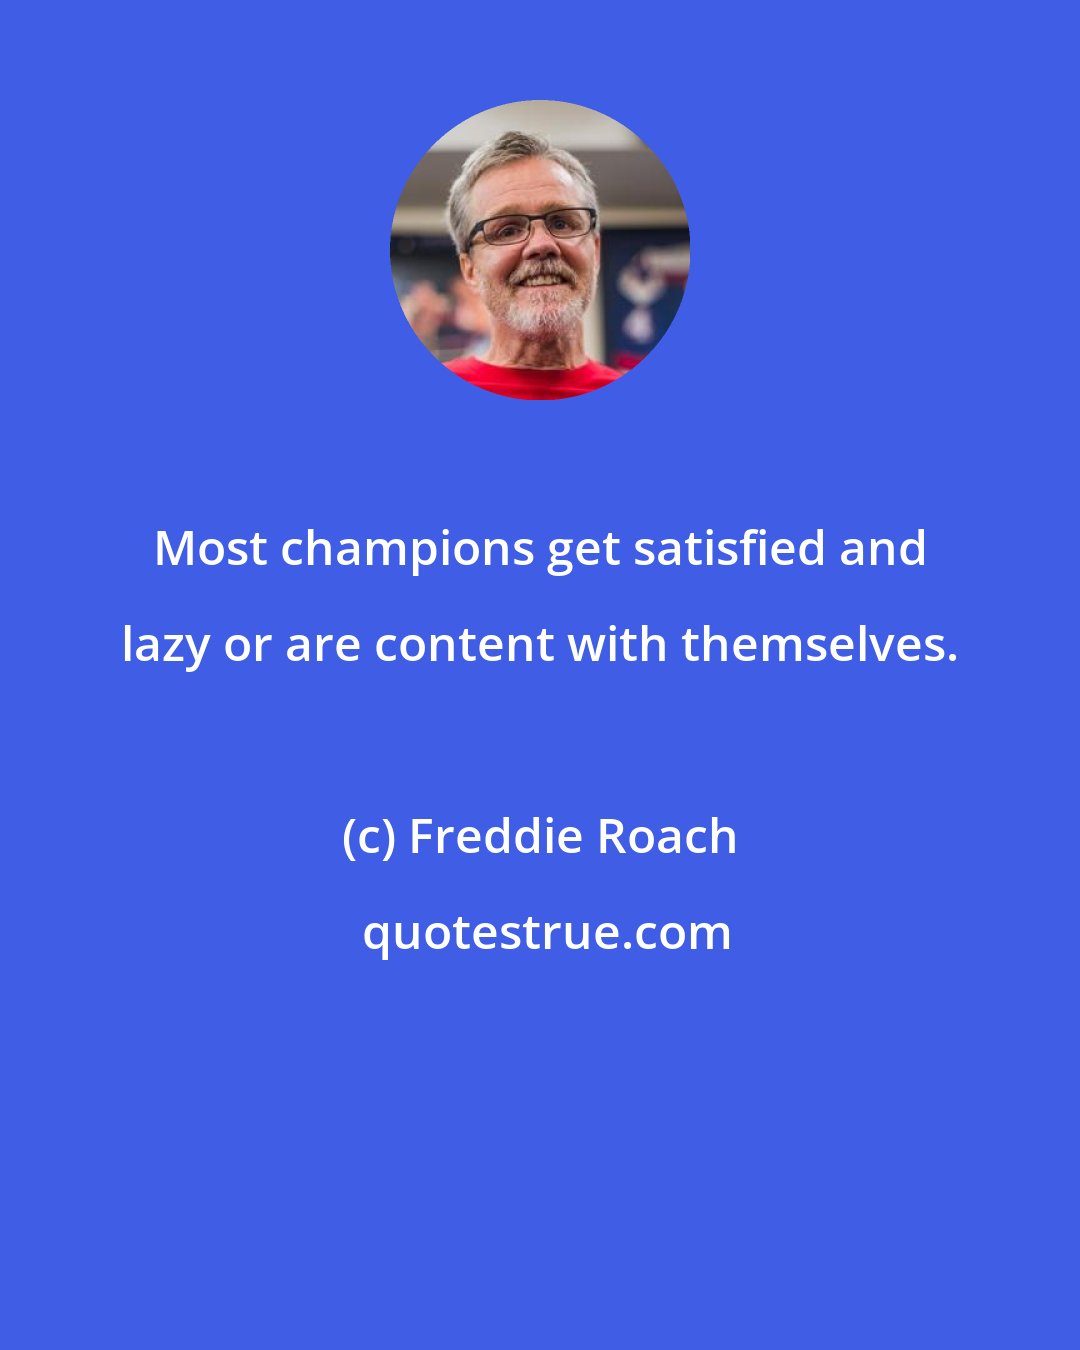 Freddie Roach: Most champions get satisfied and lazy or are content with themselves.